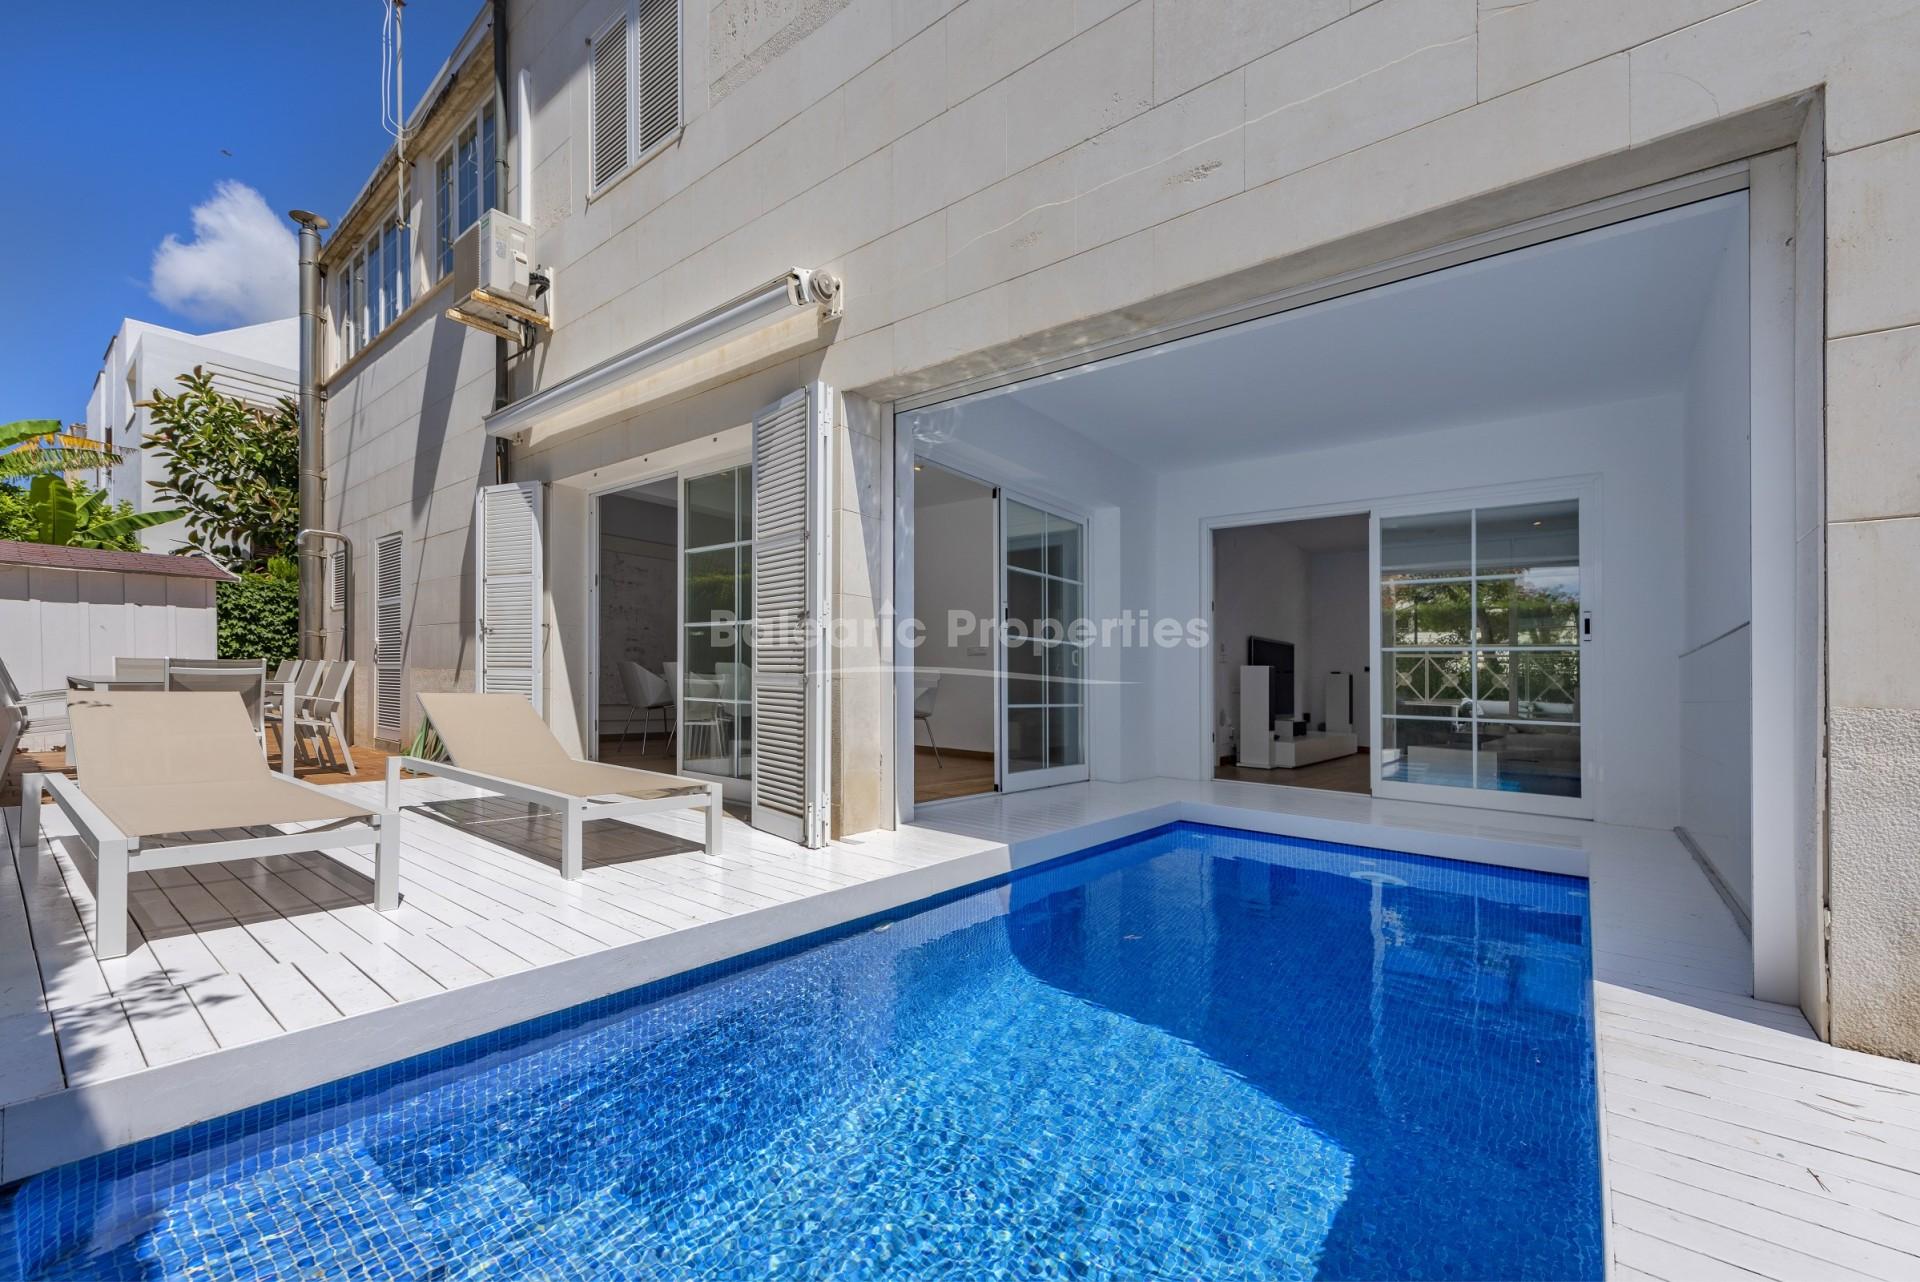 Elegantly designed villa for sale, just steps away from the beach in Puerto Pollensa, Mallorca